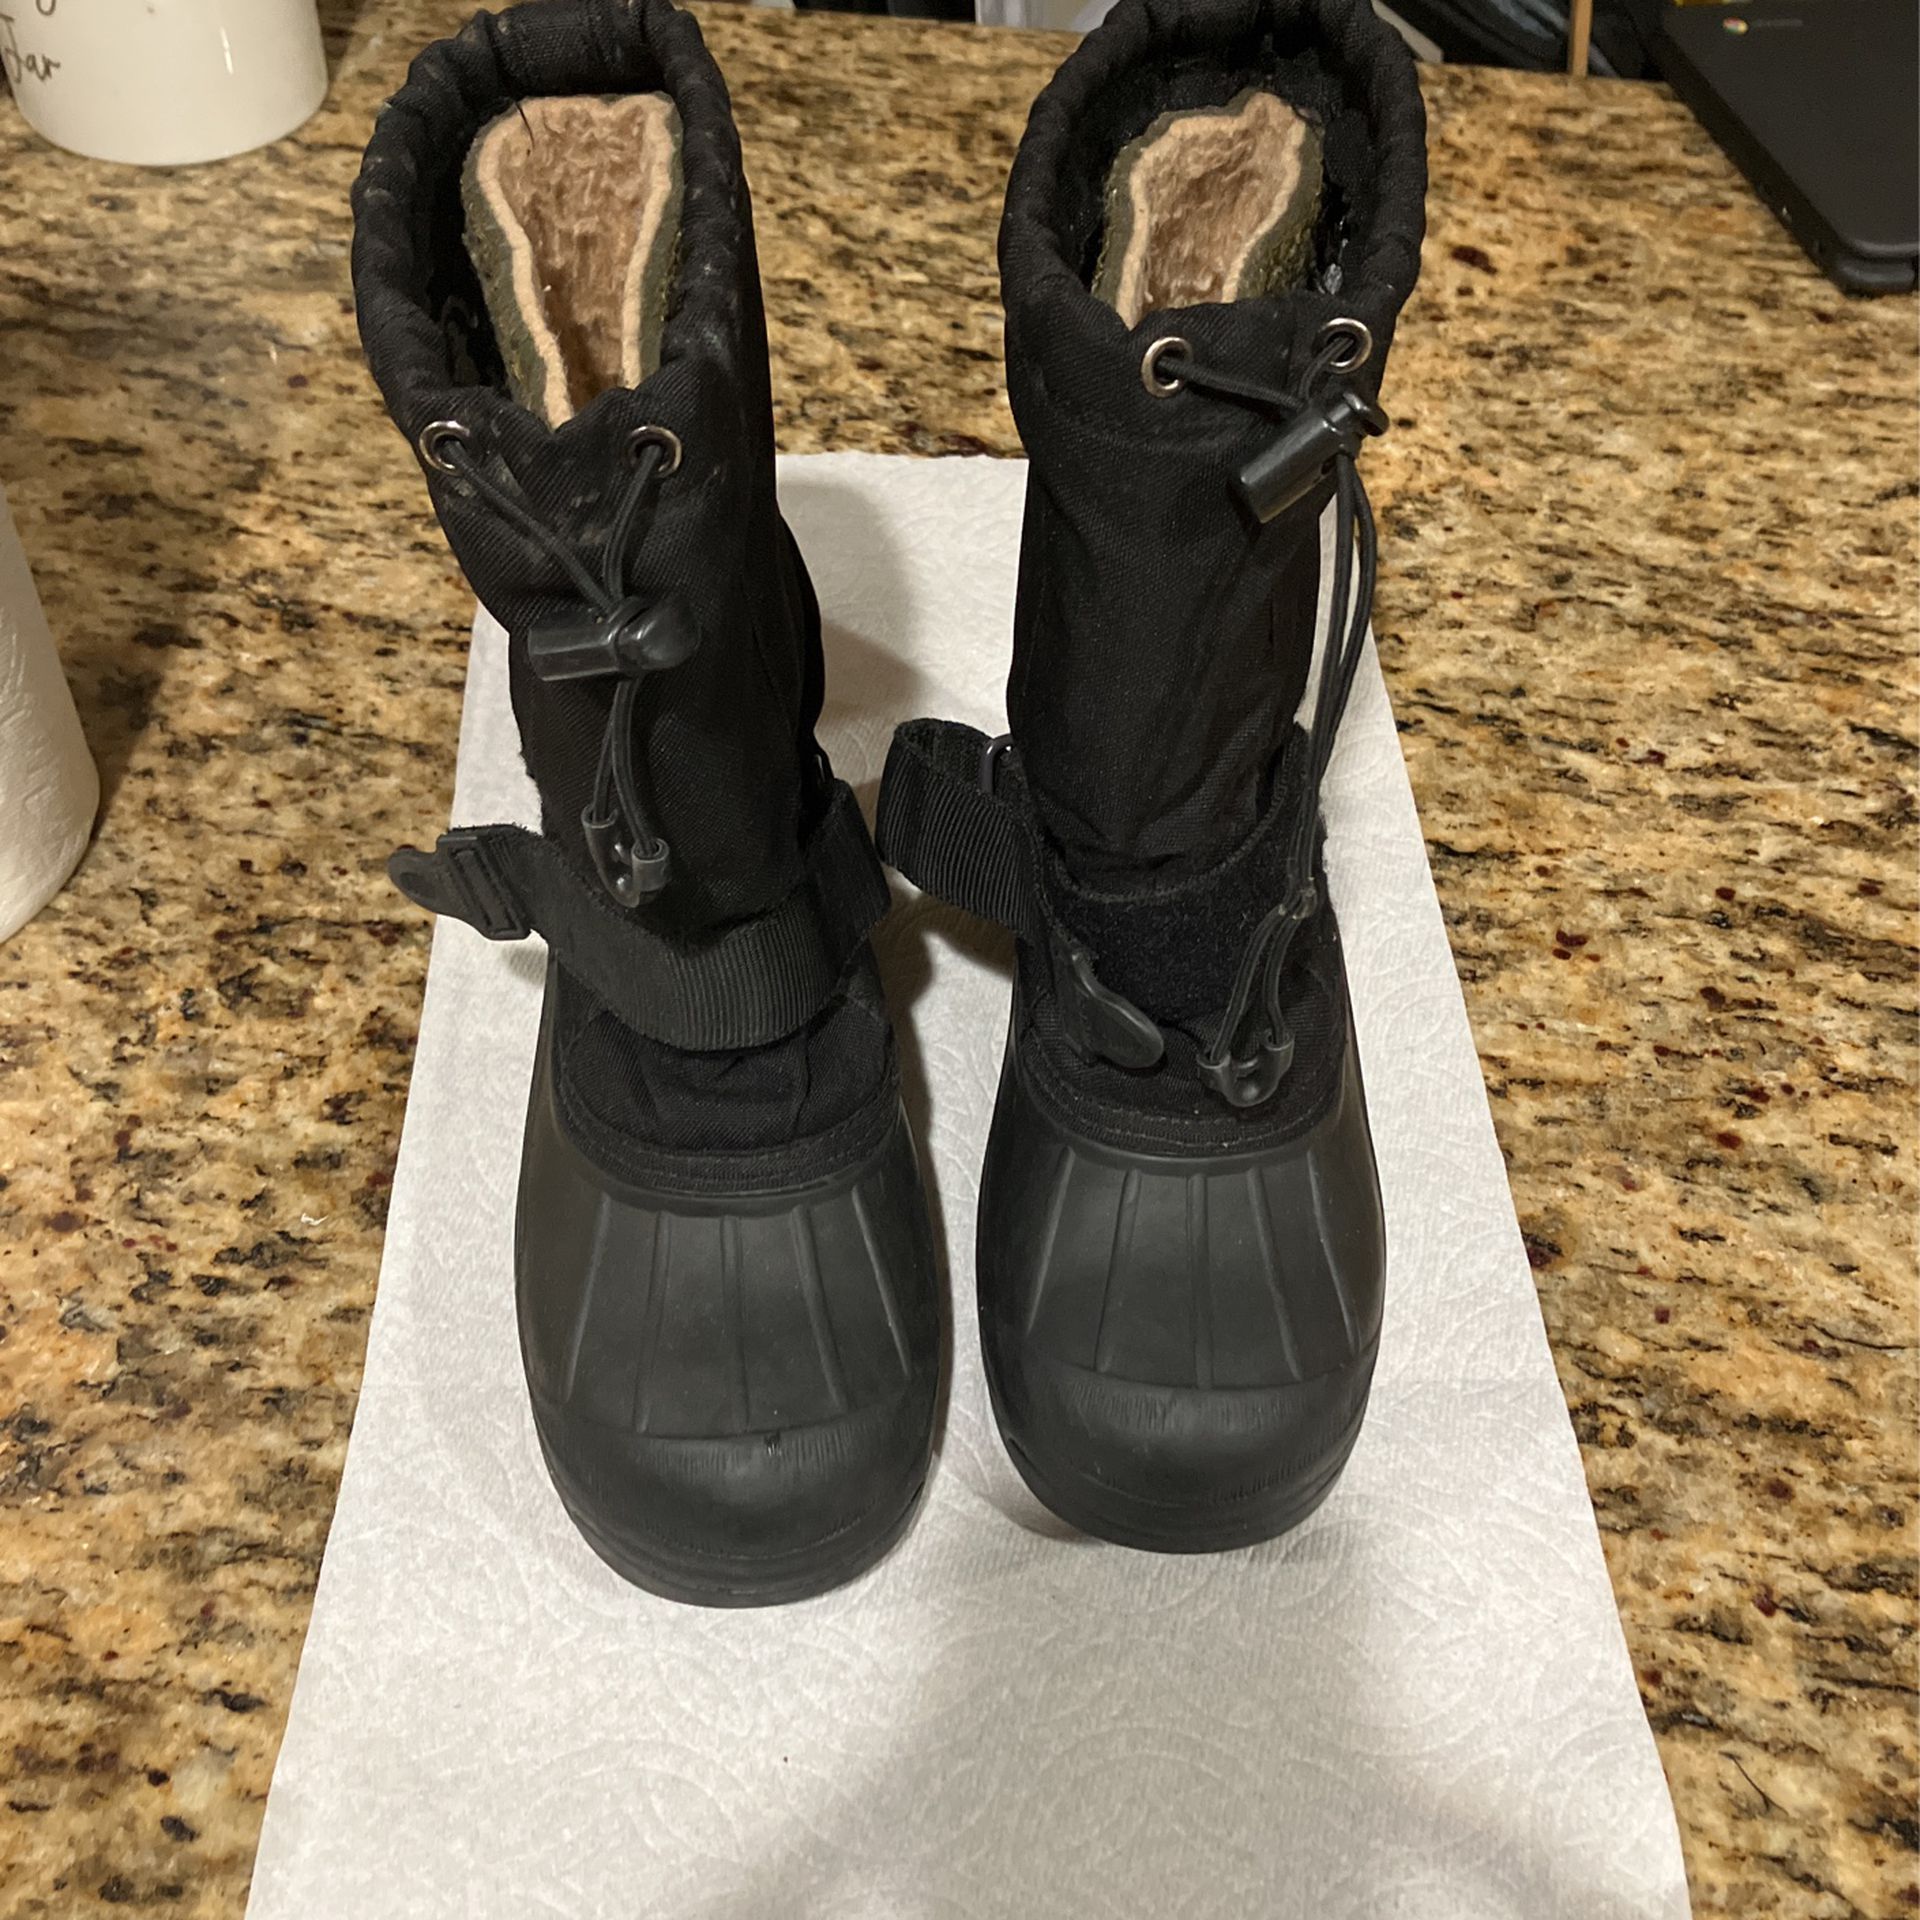 Snow Boots Size 2